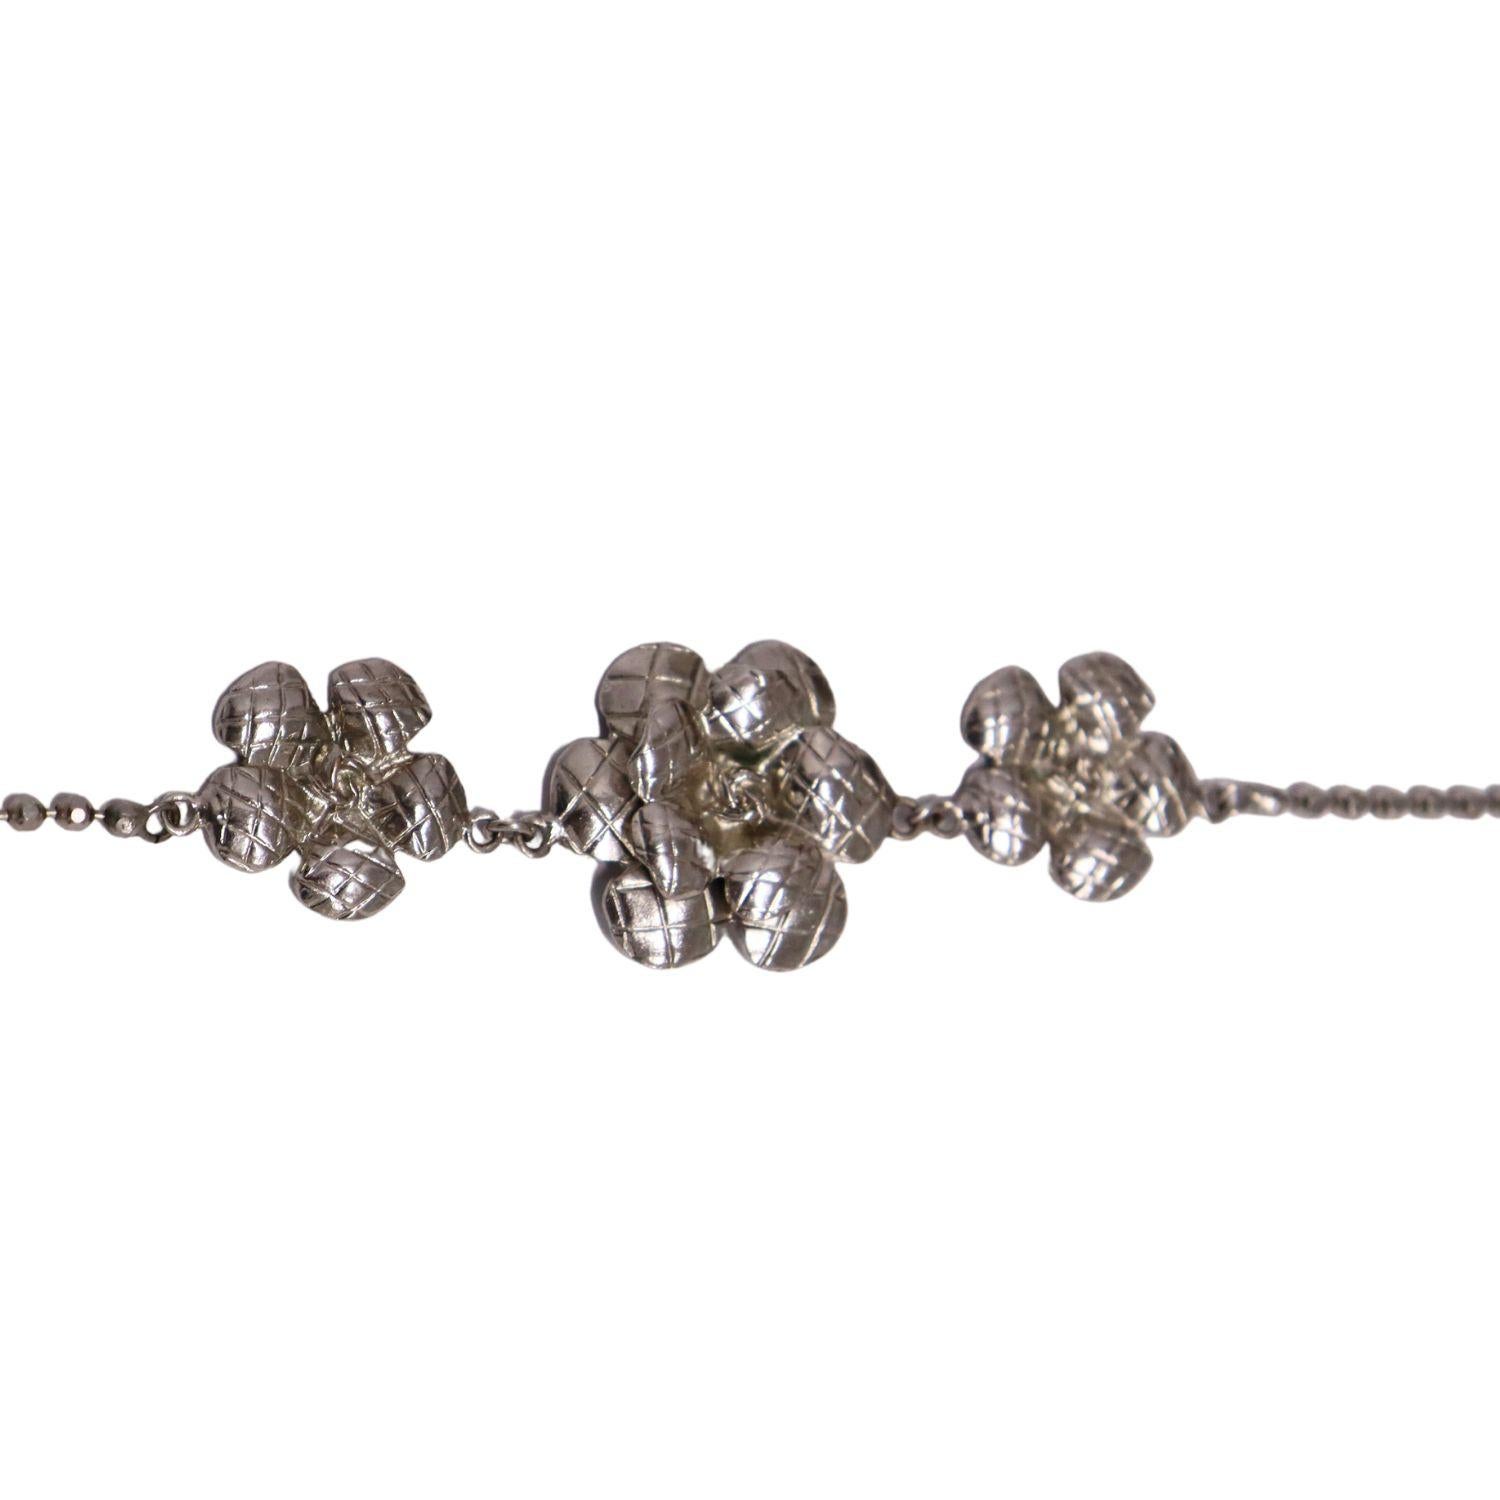 Chanel chain choker necklace with three silver flower details

Color: Silver
Material: Metal
Large Camellia Size: 3cm X 3cm
Small Camellia Size: 2cm X 2cm
Additional information:
Condition: Excellent 